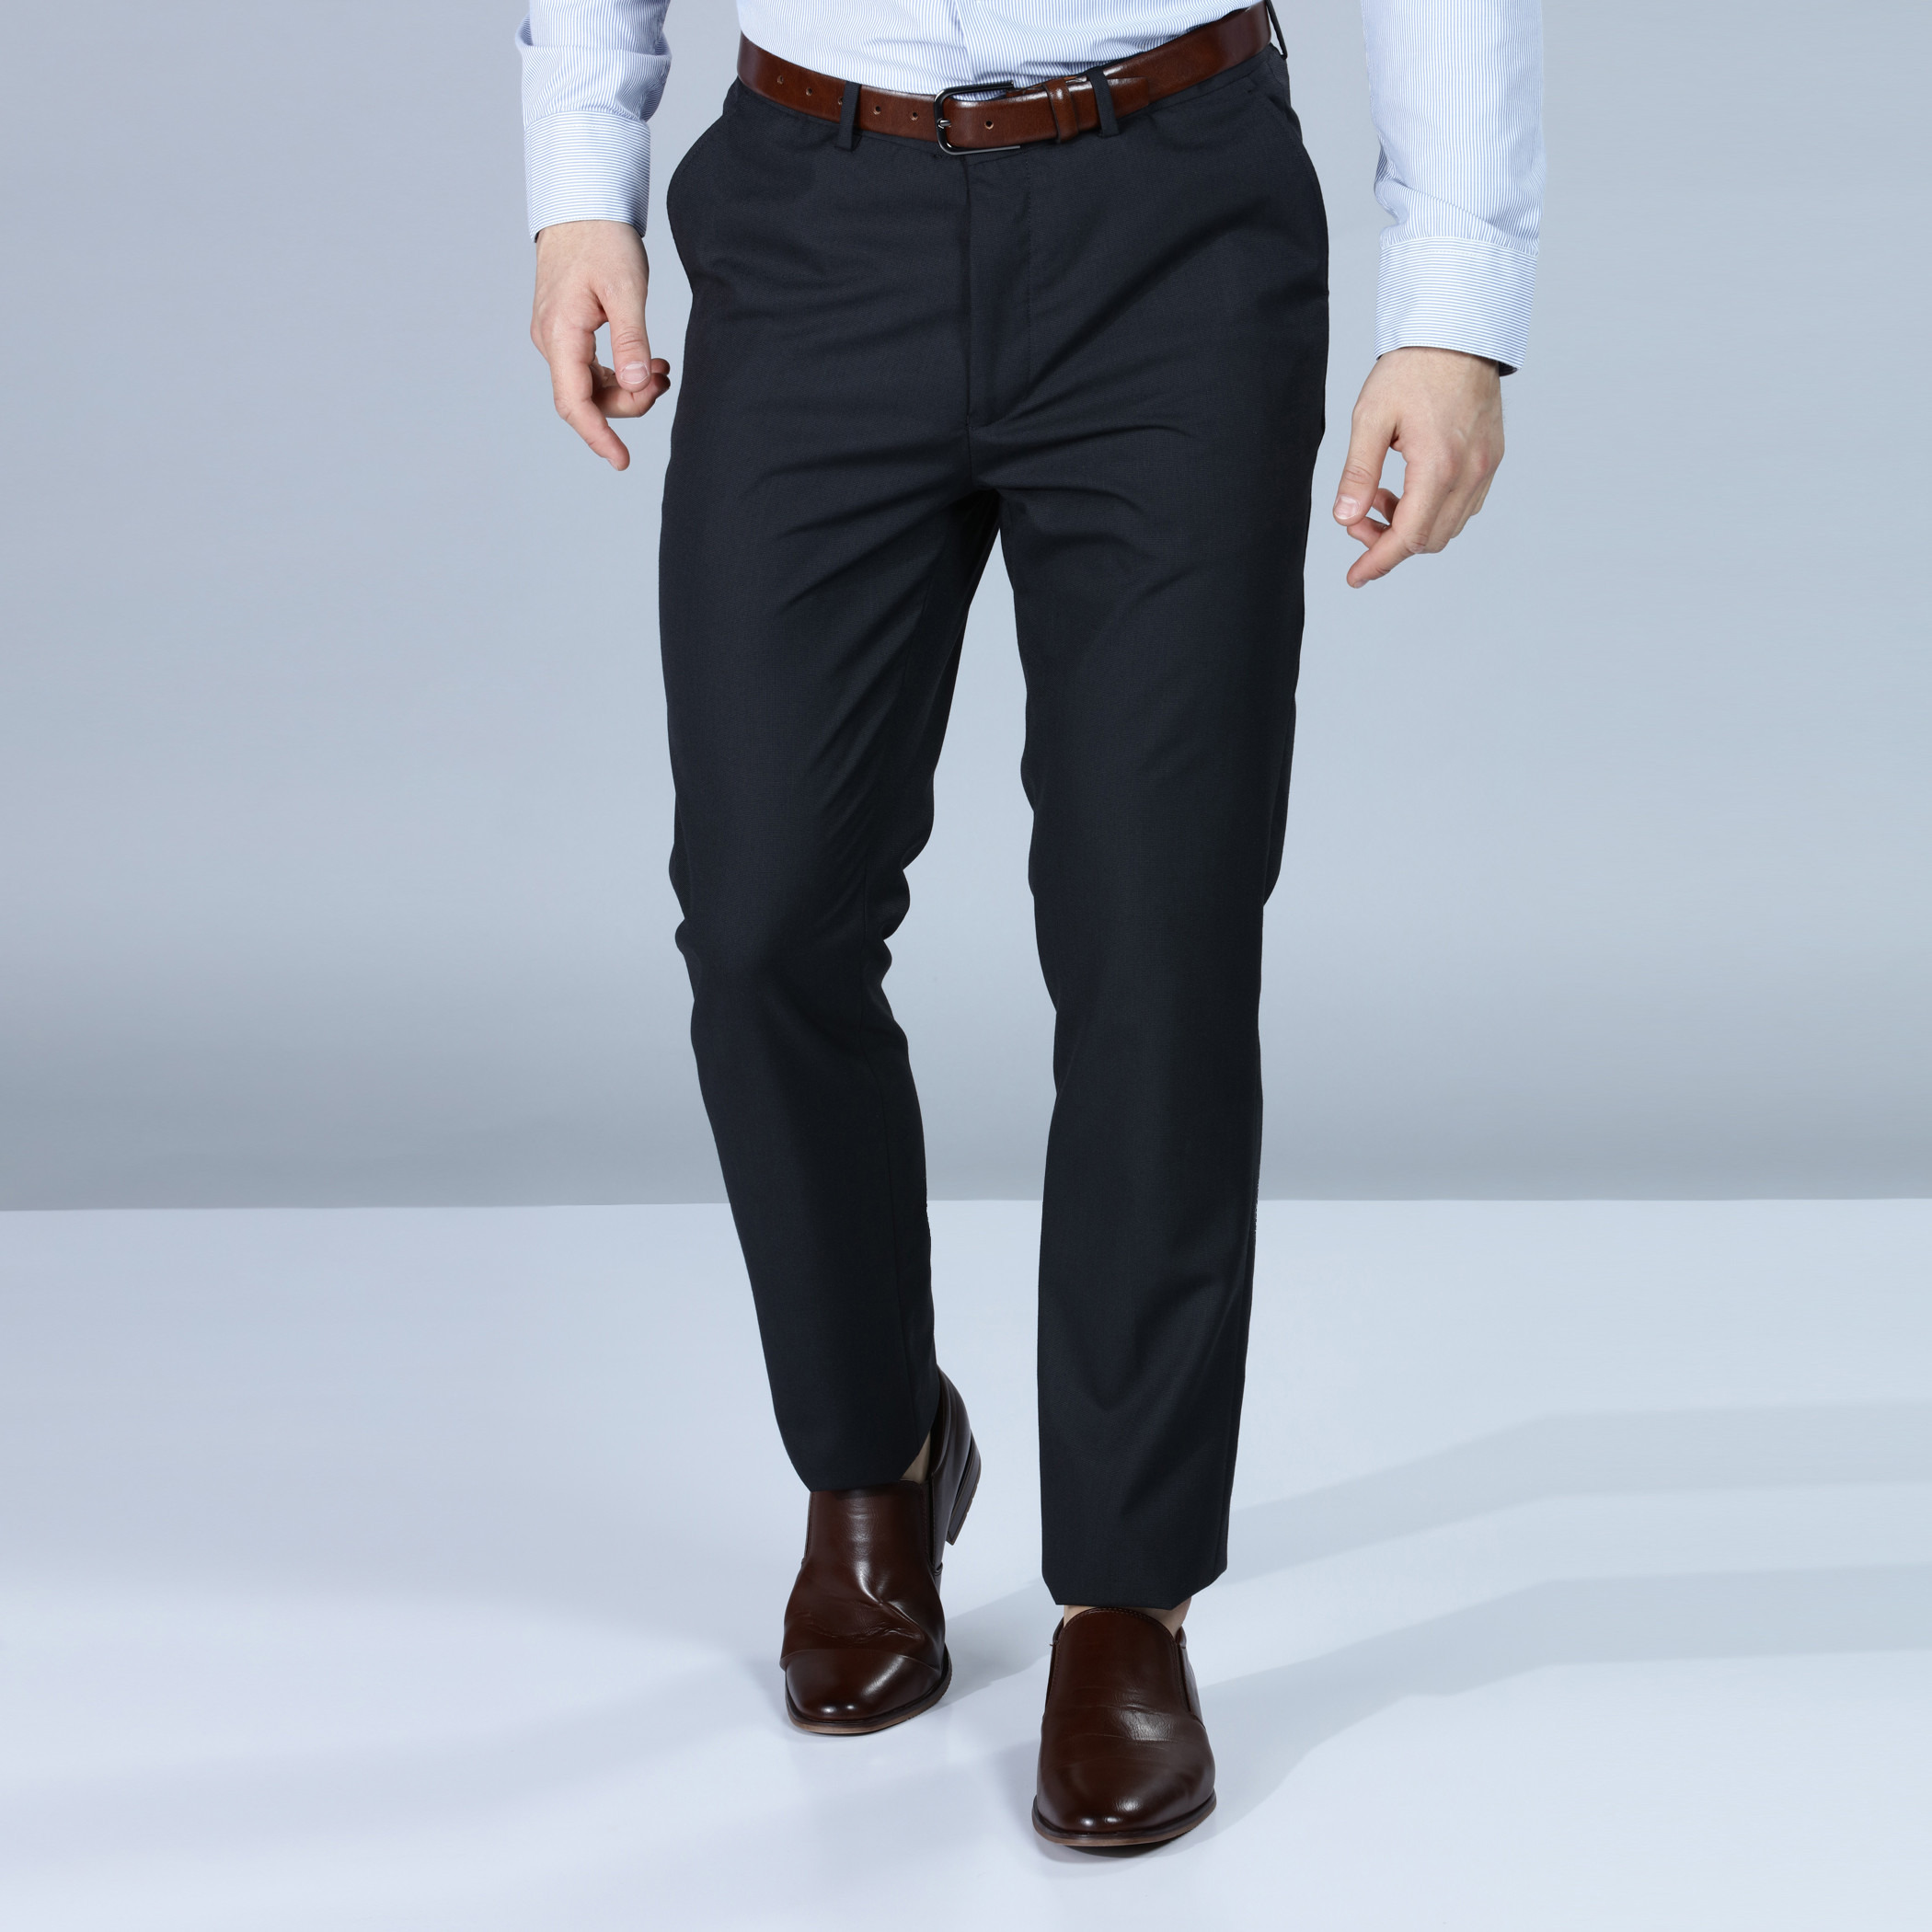 Men's Formal Trousers & Hight Waist Pants in cotton on sale | FASHIOLA INDIA